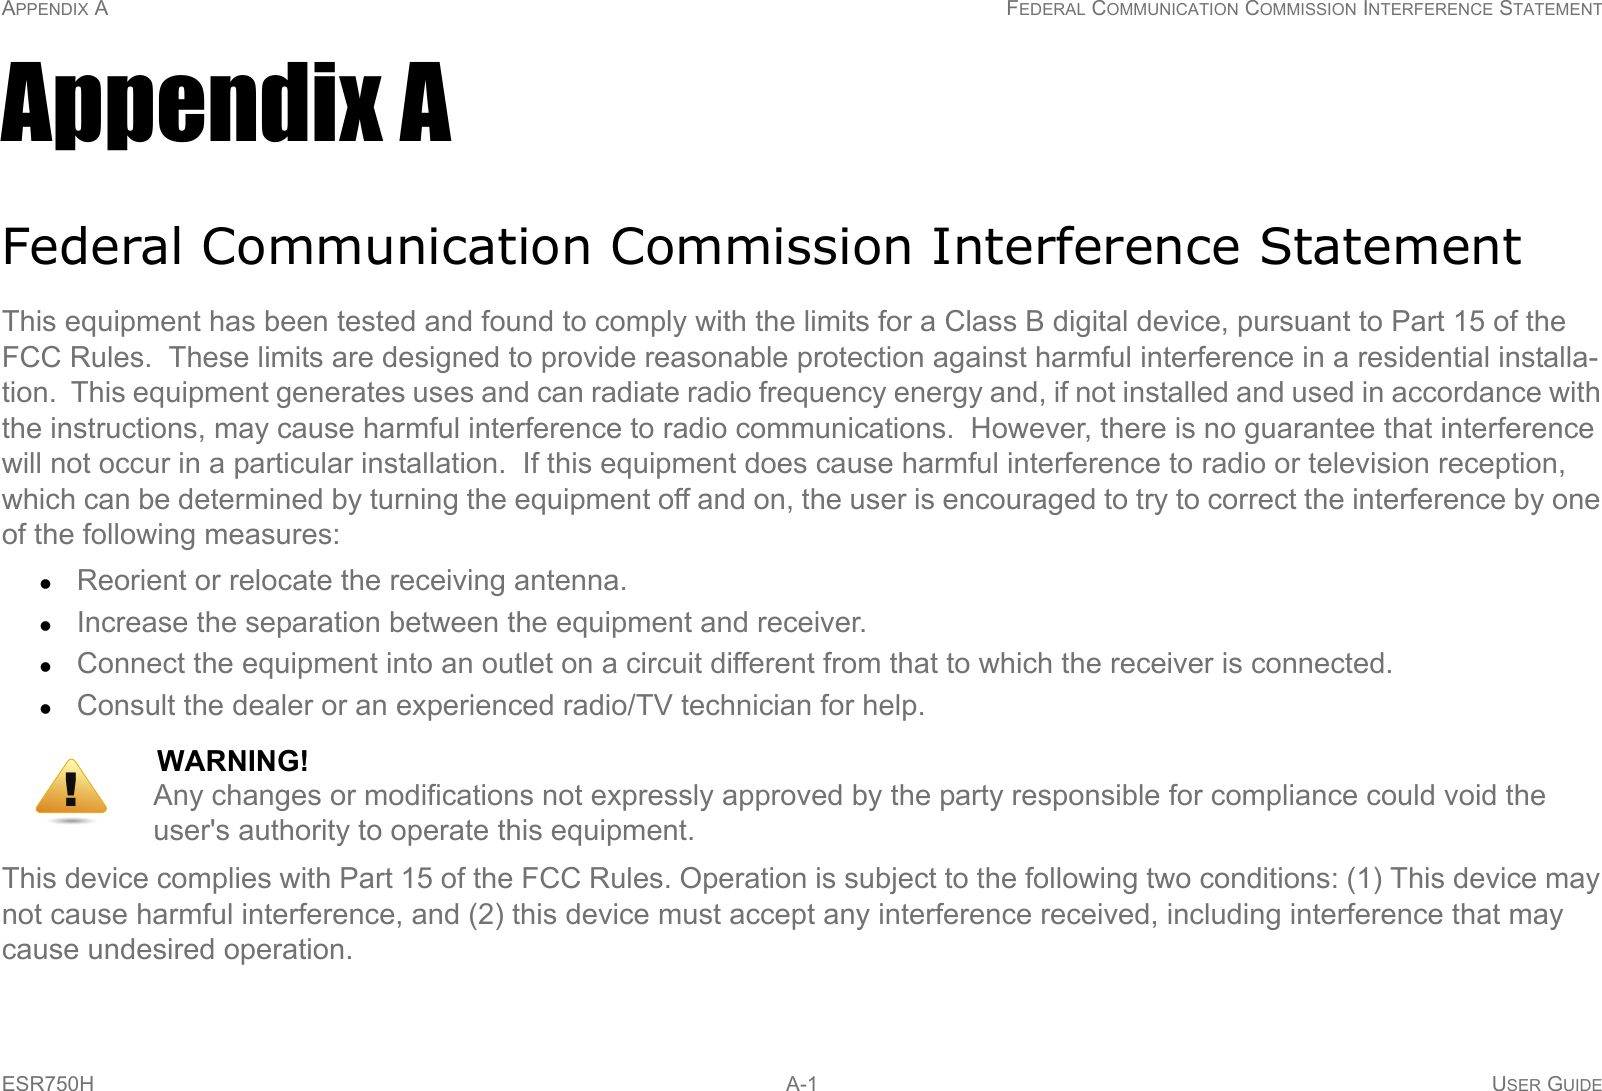 APPENDIX A FEDERAL COMMUNICATION COMMISSION INTERFERENCE STATEMENTESR750H  A-1 USER GUIDEAppendix AFederal Communication Commission Interference StatementThis equipment has been tested and found to comply with the limits for a Class B digital device, pursuant to Part 15 of the FCC Rules.  These limits are designed to provide reasonable protection against harmful interference in a residential installa-tion.  This equipment generates uses and can radiate radio frequency energy and, if not installed and used in accordance with the instructions, may cause harmful interference to radio communications.  However, there is no guarantee that interference will not occur in a particular installation.  If this equipment does cause harmful interference to radio or television reception, which can be determined by turning the equipment off and on, the user is encouraged to try to correct the interference by one of the following measures:Reorient or relocate the receiving antenna.Increase the separation between the equipment and receiver.Connect the equipment into an outlet on a circuit different from that to which the receiver is connected.Consult the dealer or an experienced radio/TV technician for help.This device complies with Part 15 of the FCC Rules. Operation is subject to the following two conditions: (1) This device may not cause harmful interference, and (2) this device must accept any interference received, including interference that may cause undesired operation.WARNING!Any changes or modifications not expressly approved by the party responsible for compliance could void the user&apos;s authority to operate this equipment.!